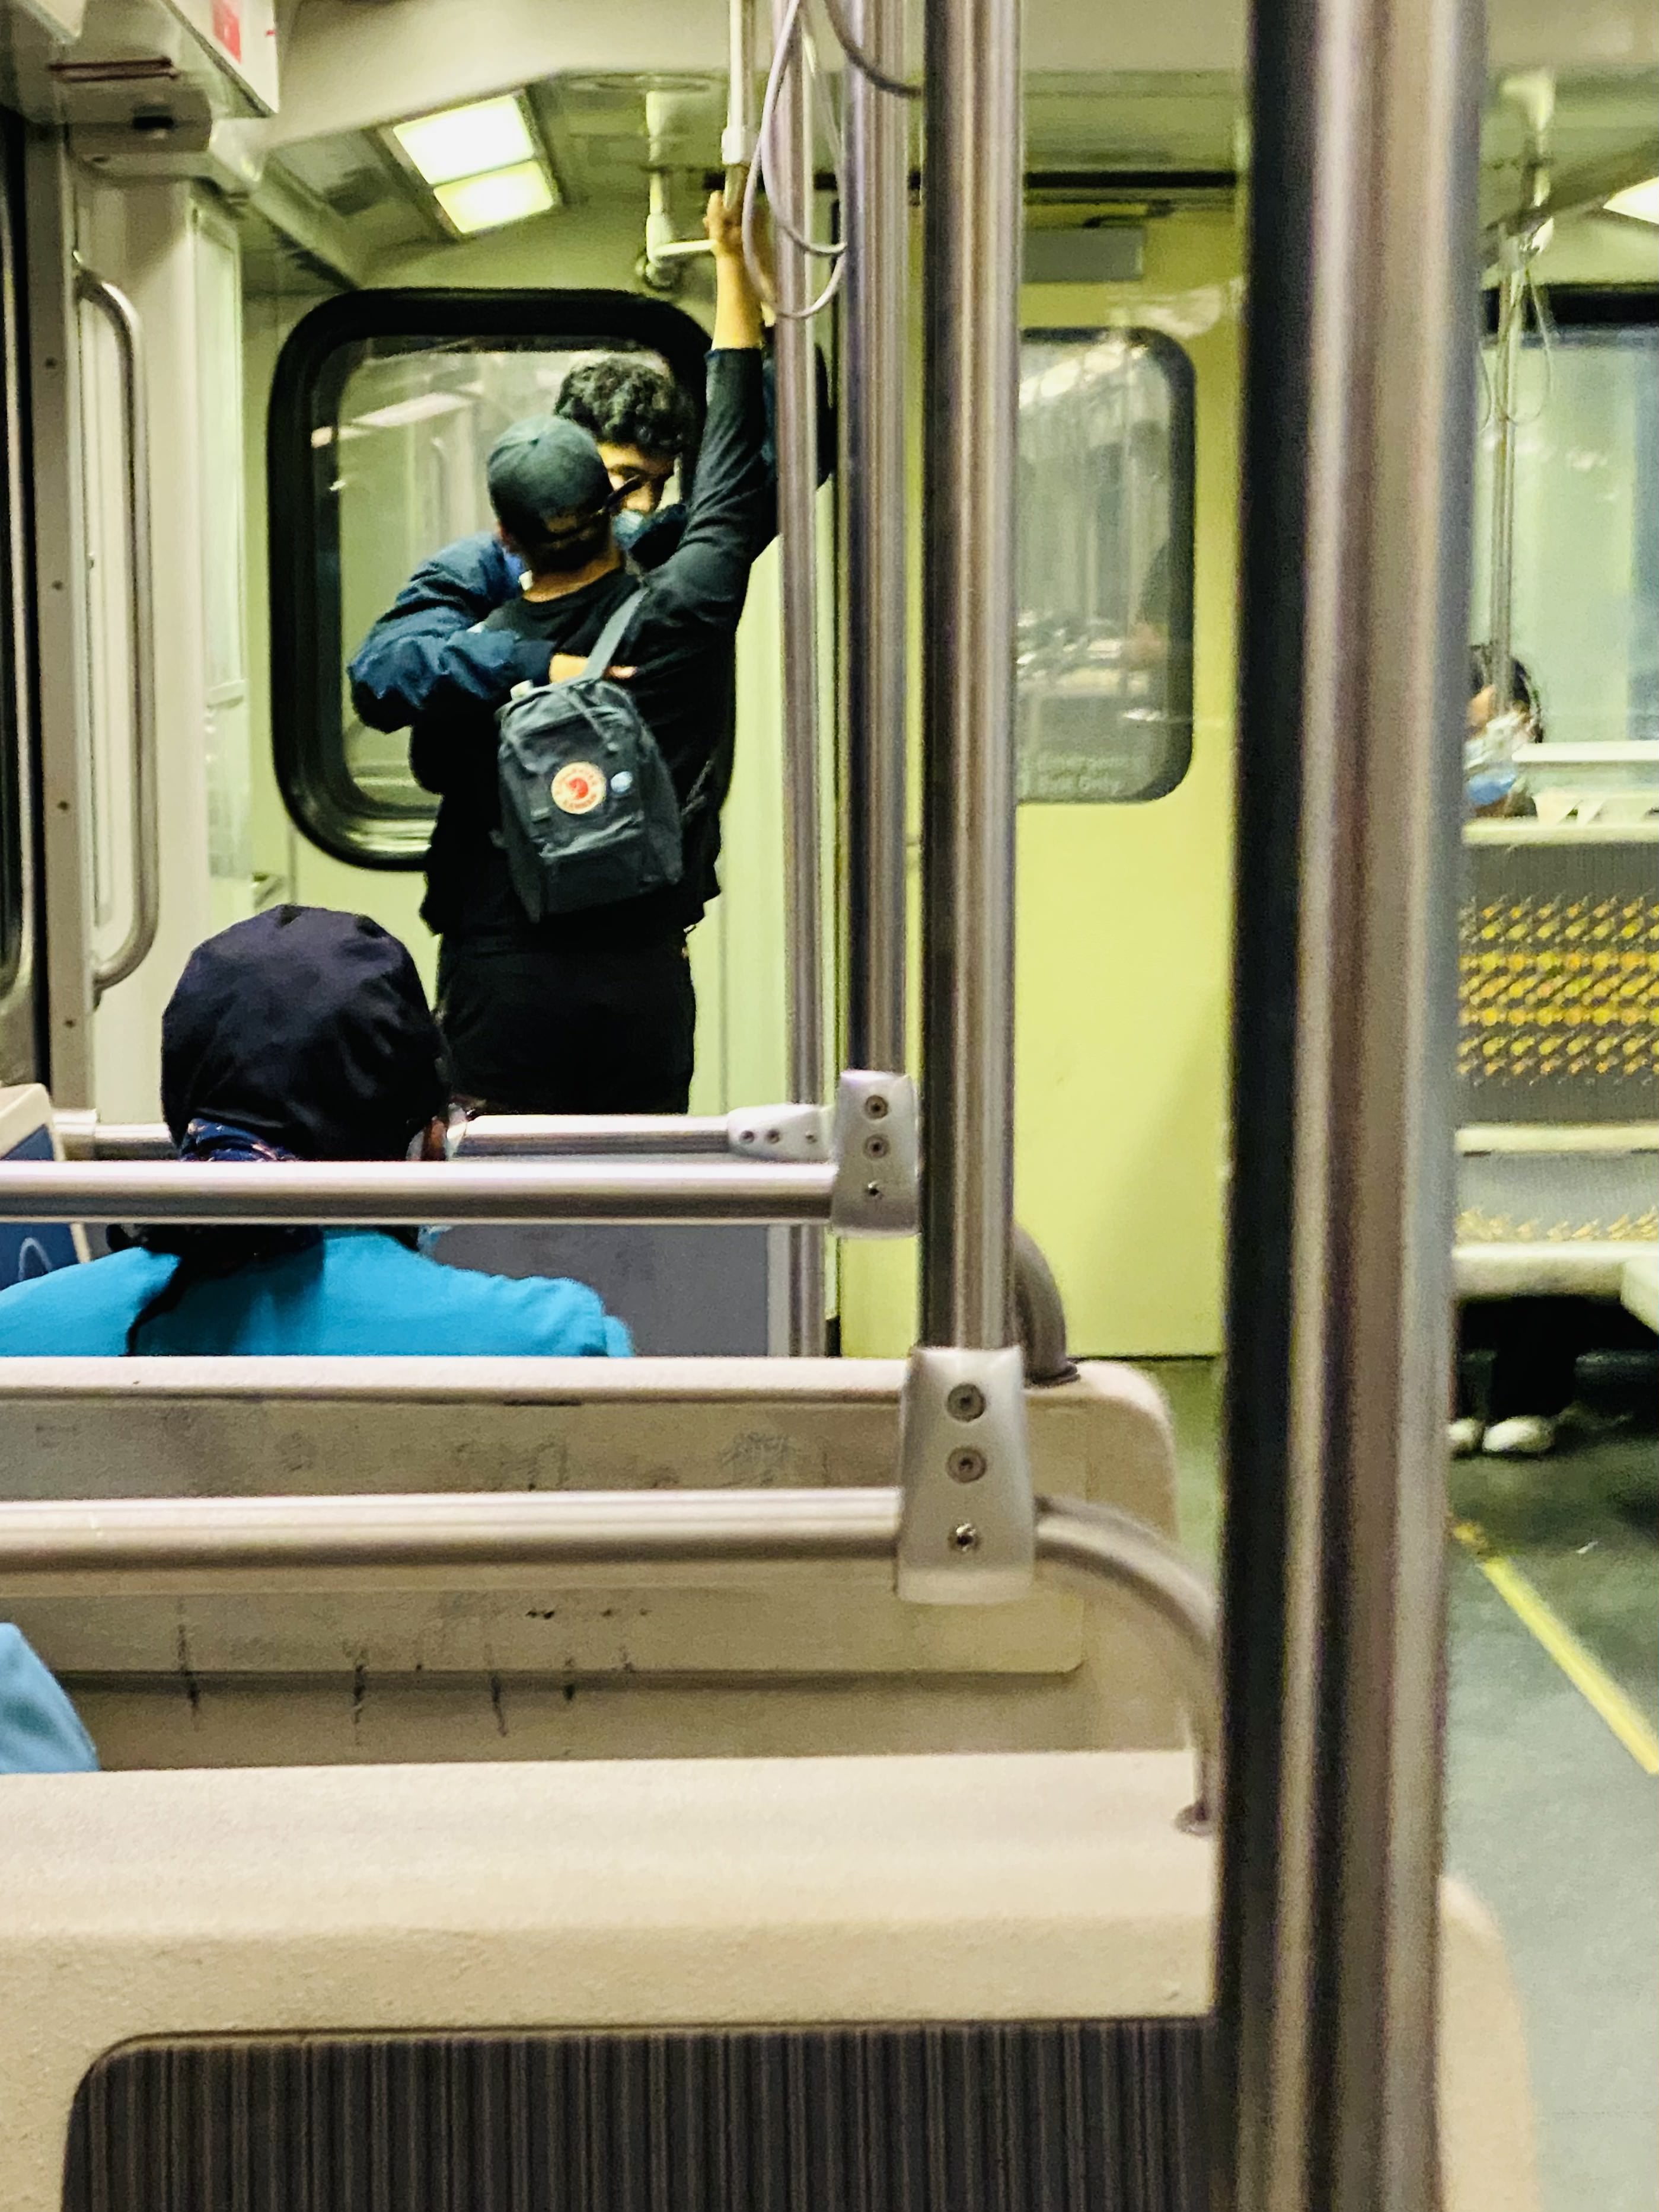 Photo of two people embracing on public transit